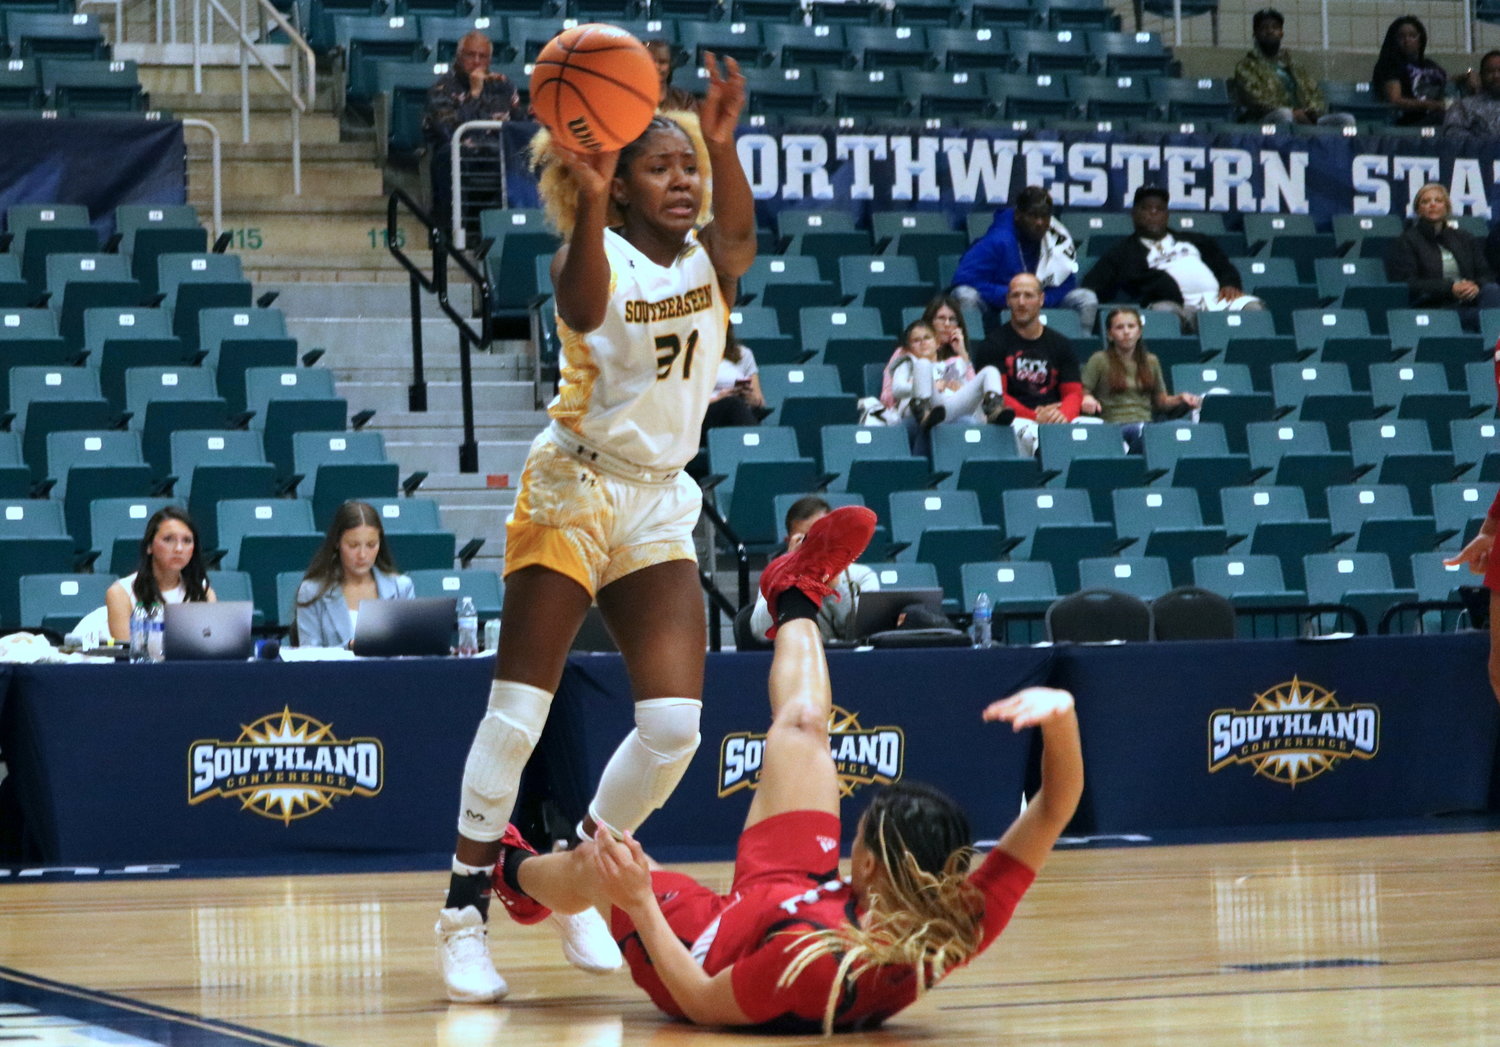 Morgan Carrier tries to pass the ball along the baseline during Sunday’s Southland Tournament Final at the Merrell Center between the University of Incarnate Word and Southeastern Louisiana.